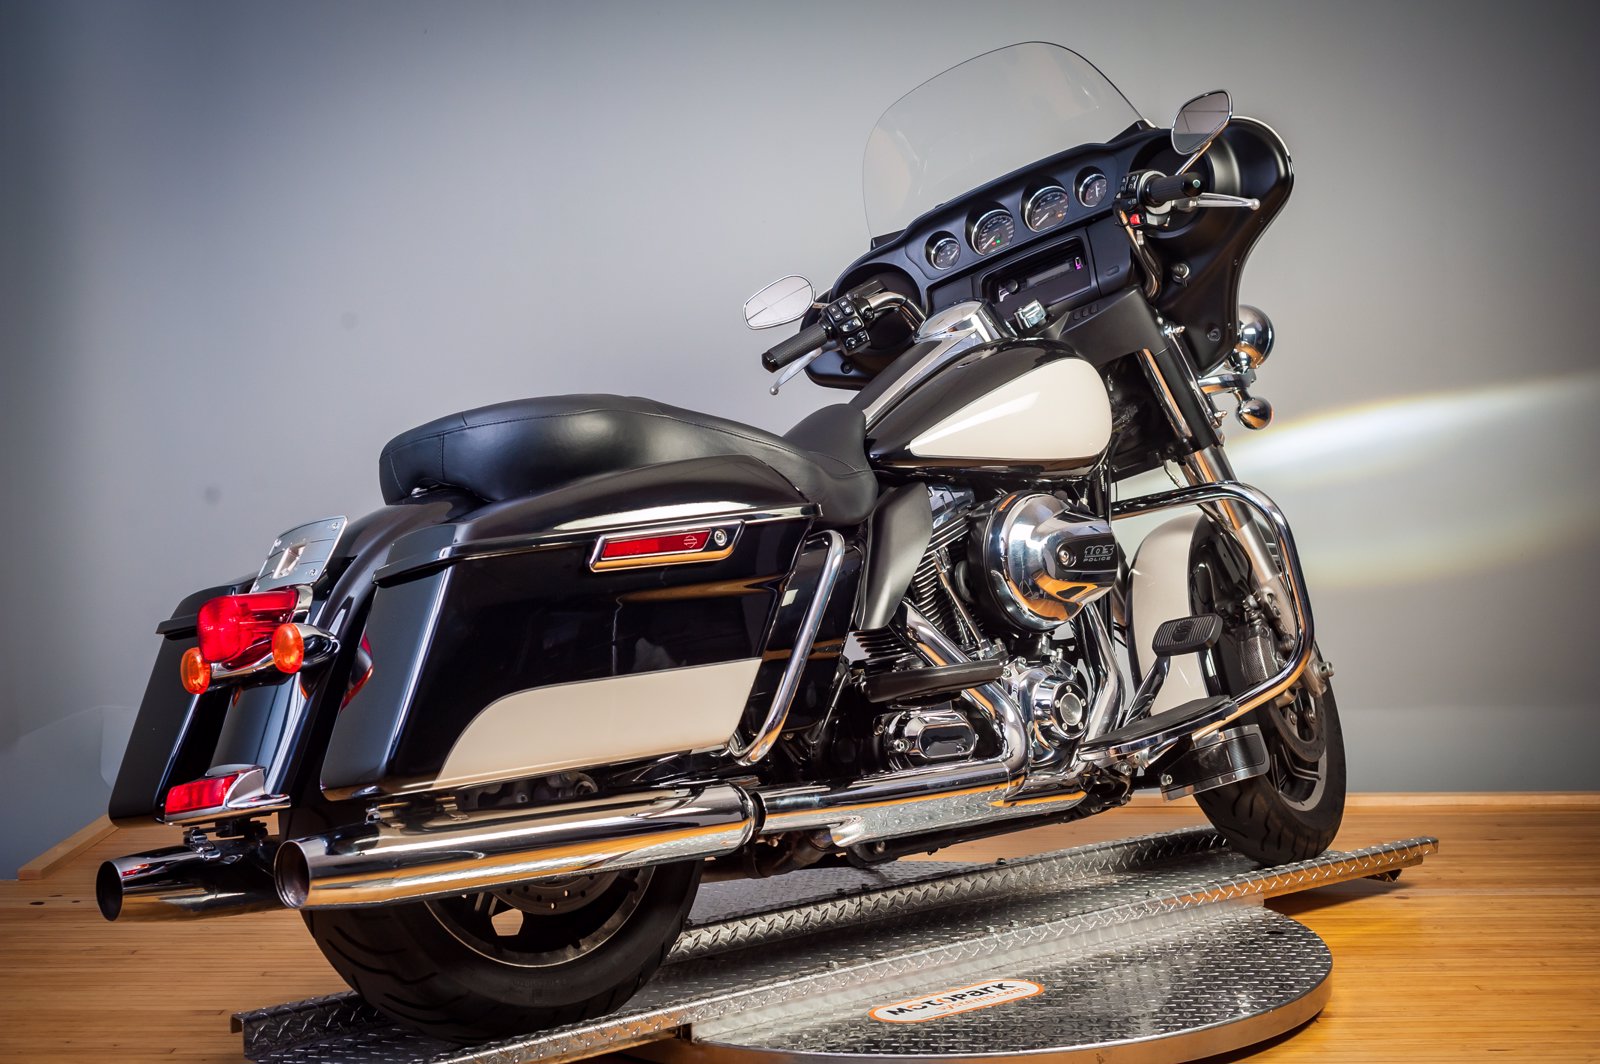 Pre-Owned 2015 Harley-Davidson Electra Glide Police FLHTP Touring in N